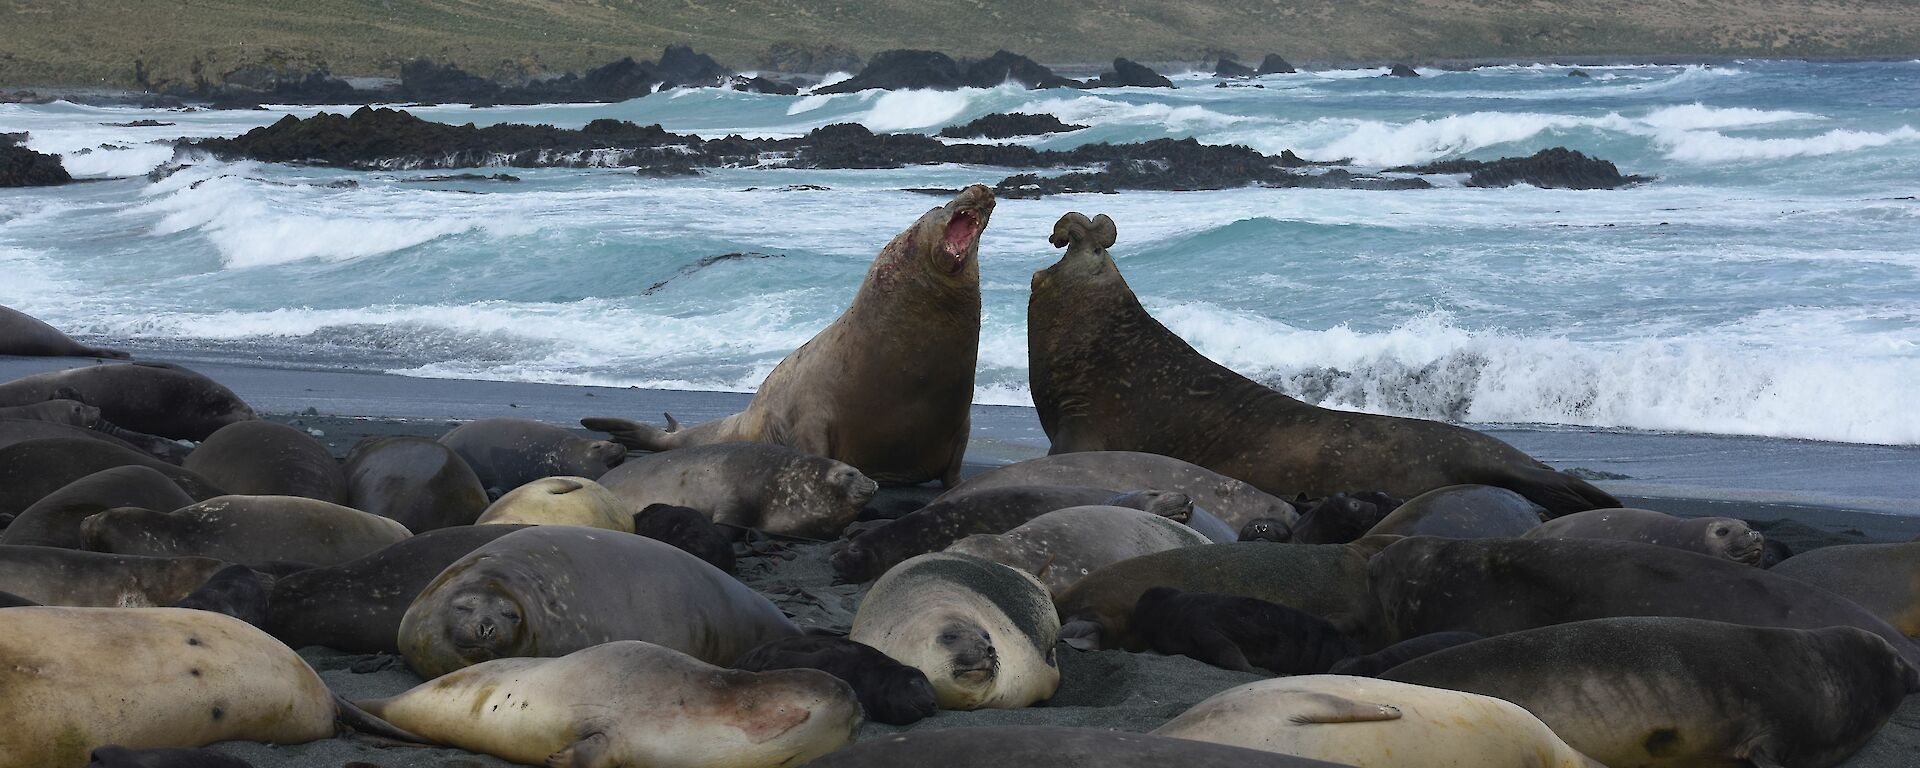 Two male elephant seal bulls clash with waves in the background